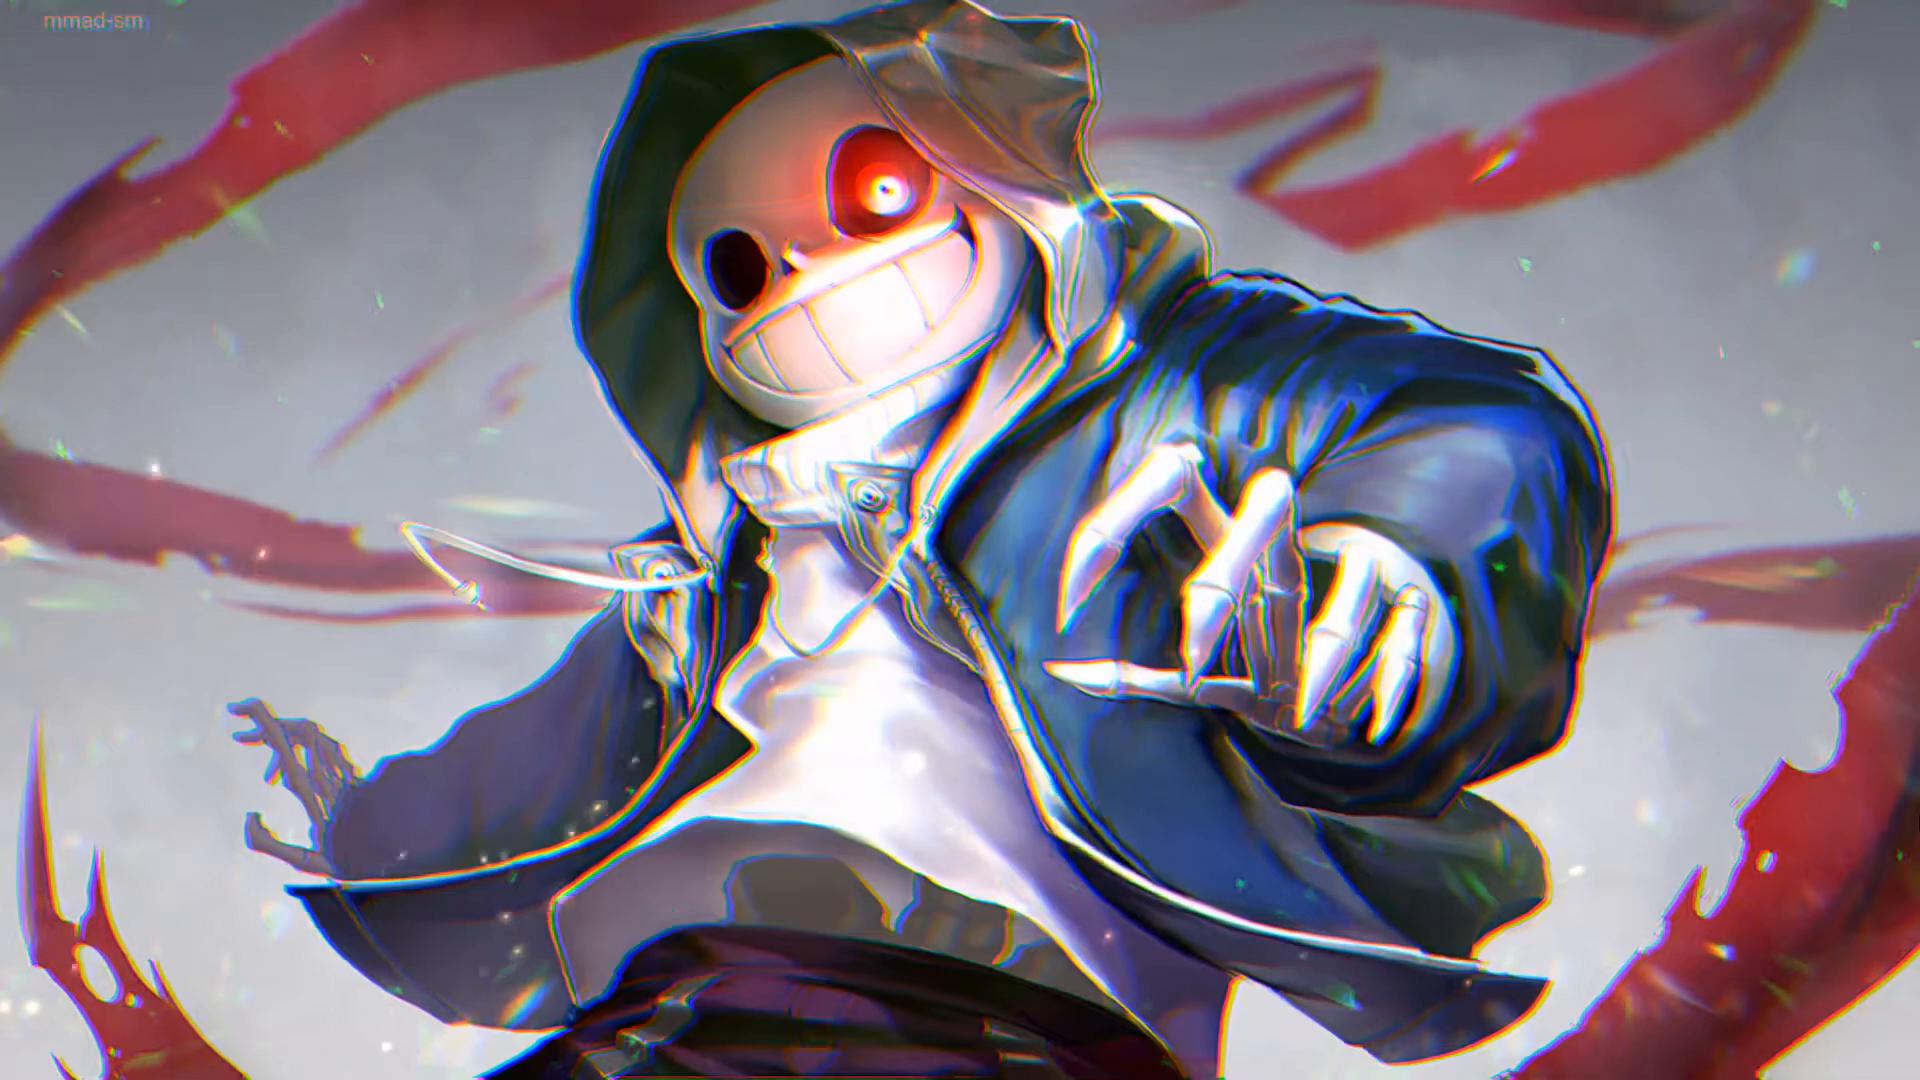 HD sans fight wallpapers